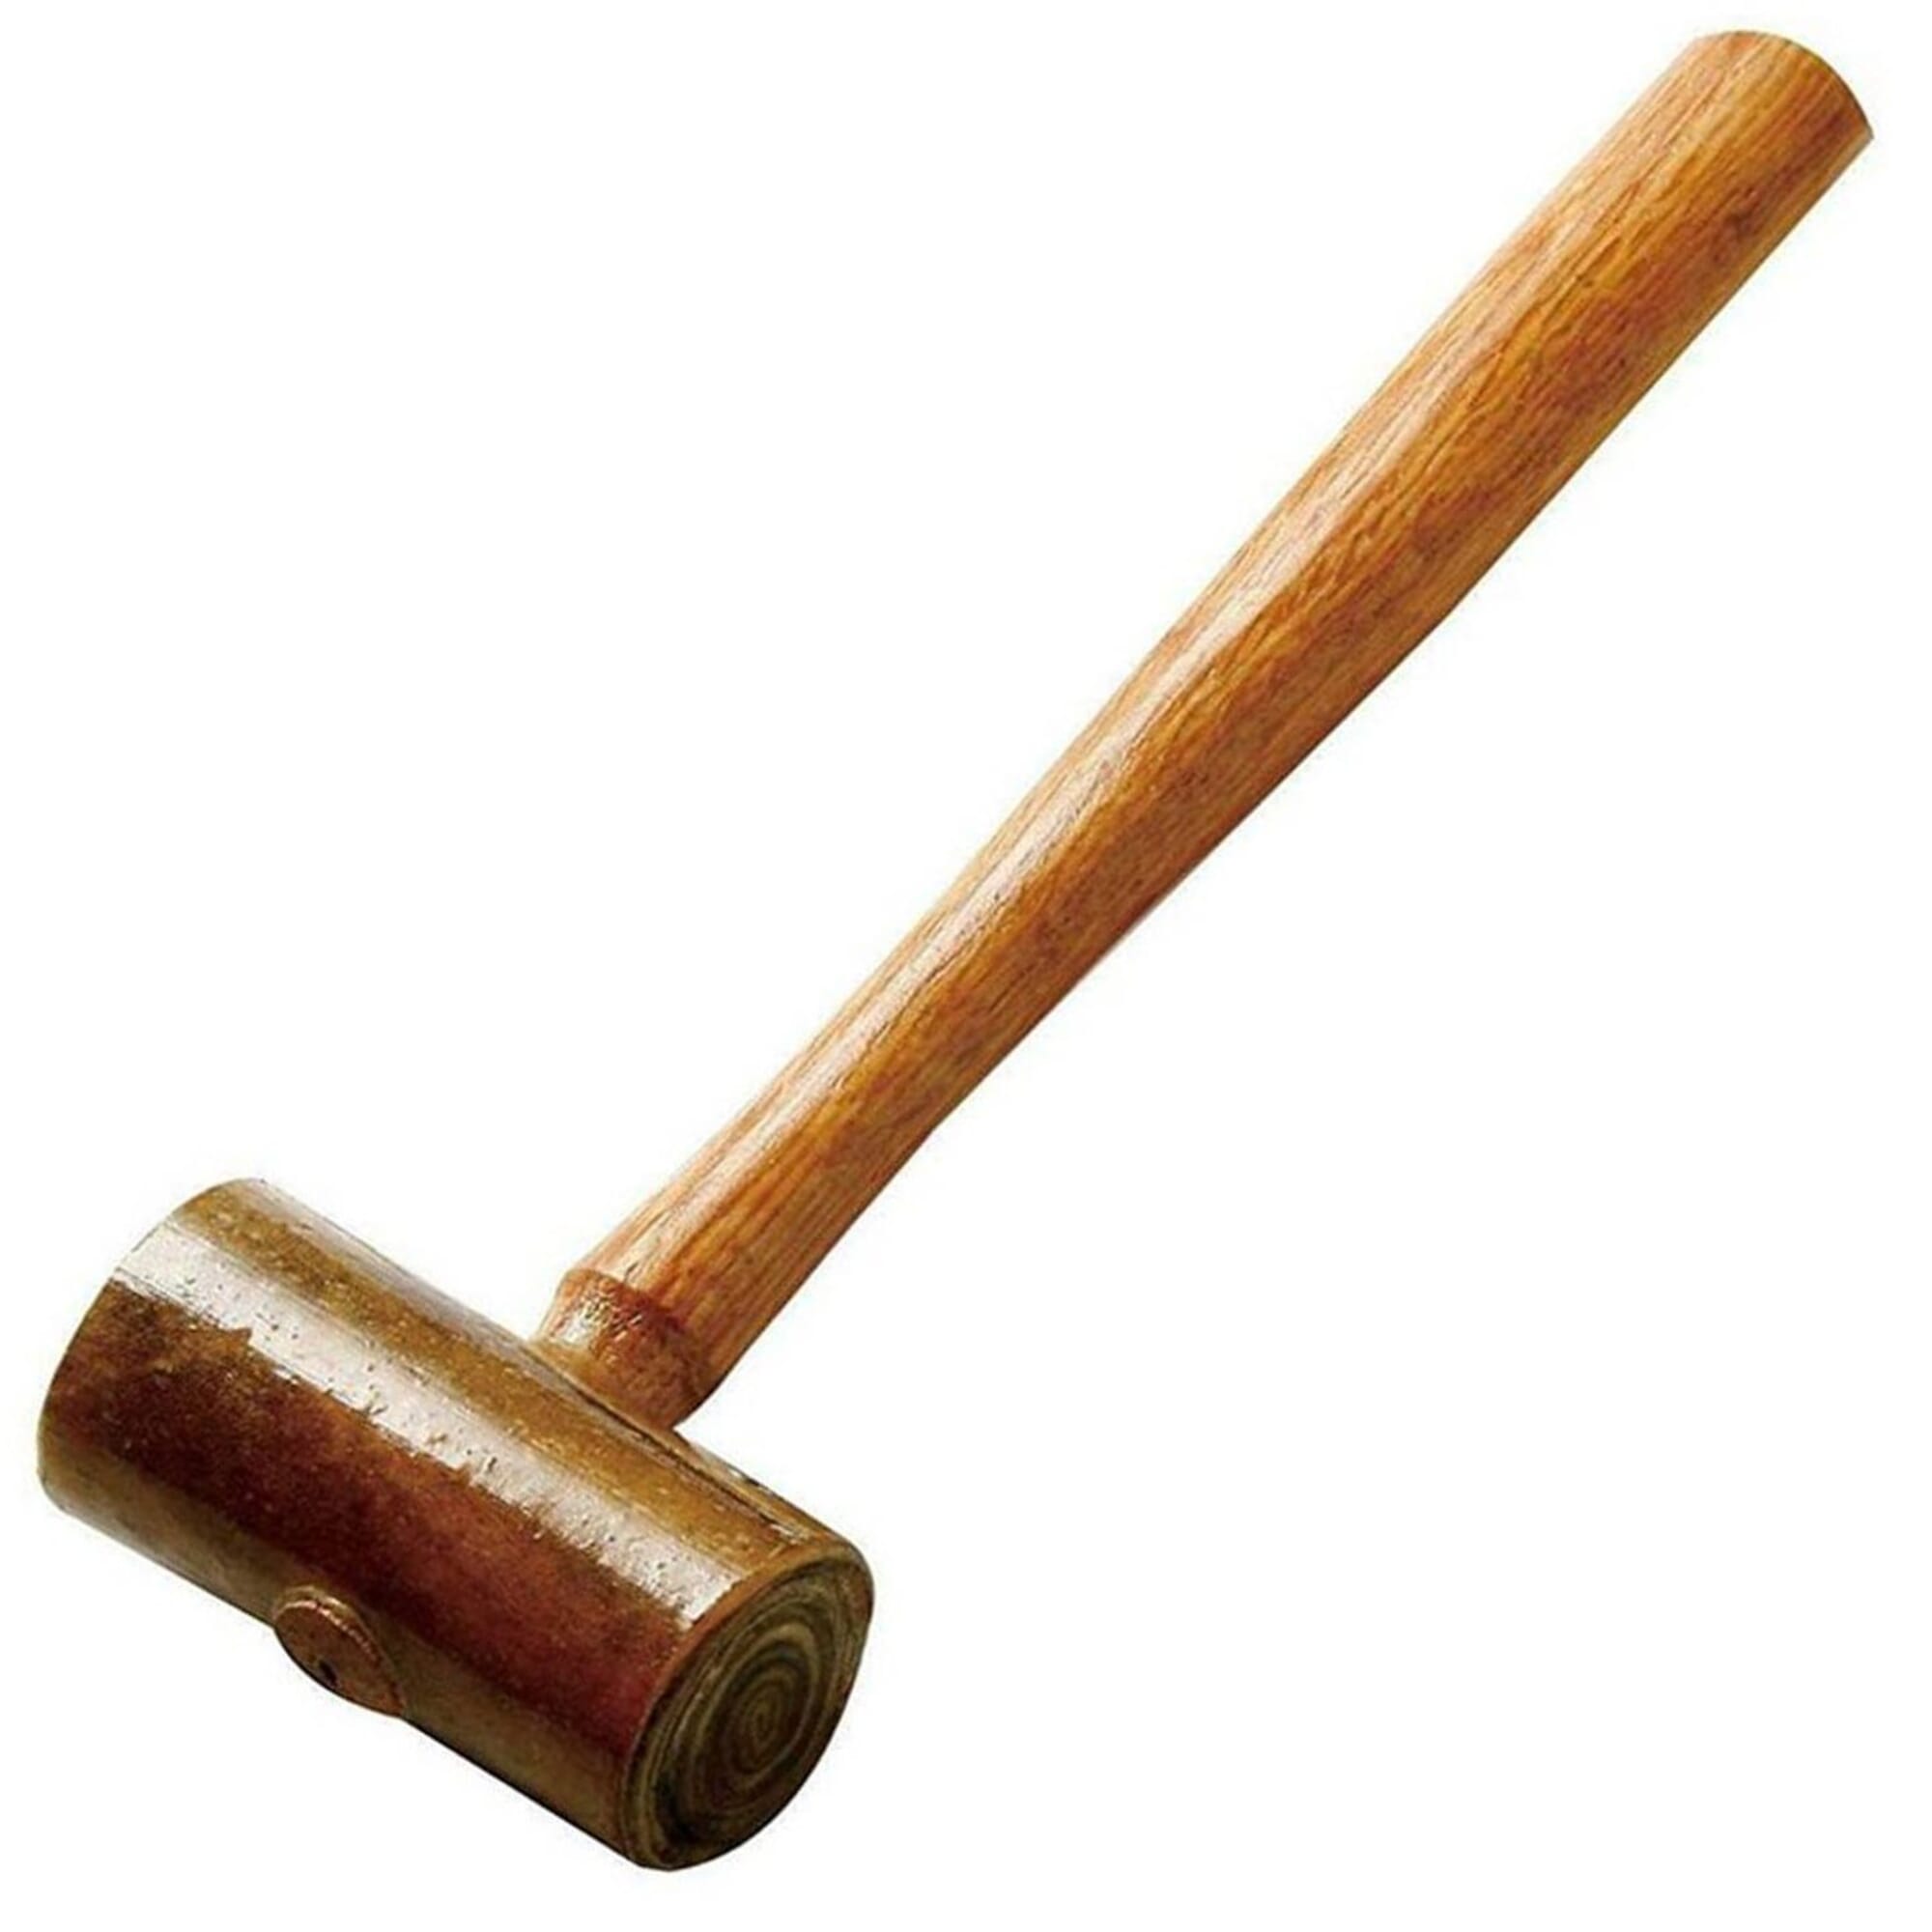 Leather Mallets, Mauls & Hammers: Choosing the Right One for Your